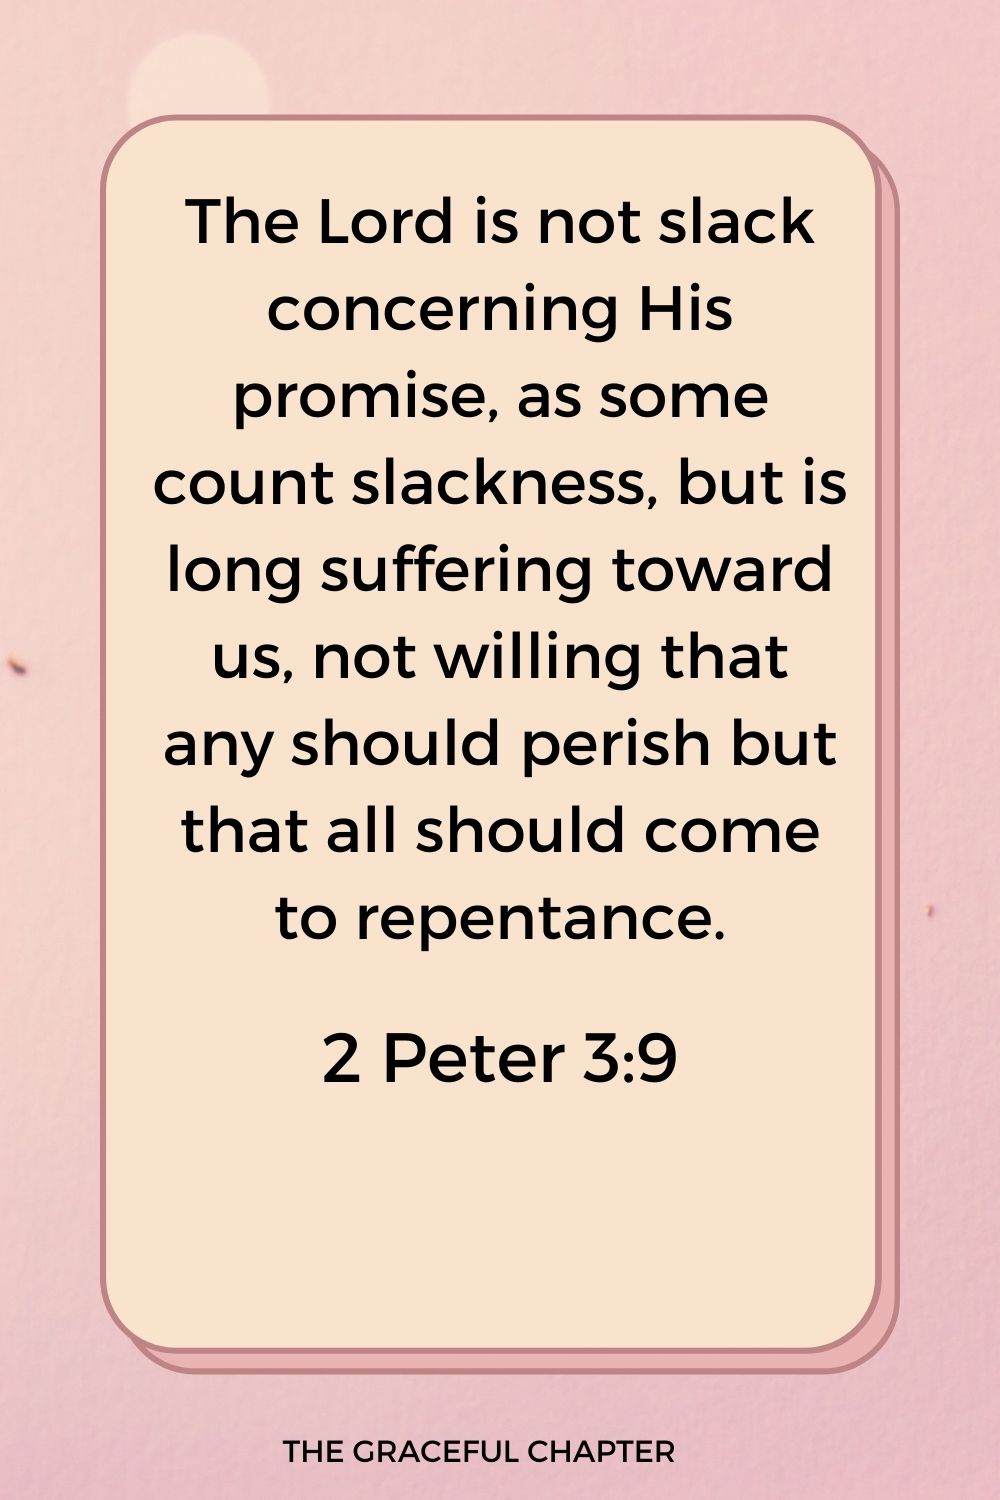 The Lord is not slack concerning His promise, as some count slackness, but is long suffering toward us, not willing that any should perish but that all should come to repentance. 2 Peter 3:9